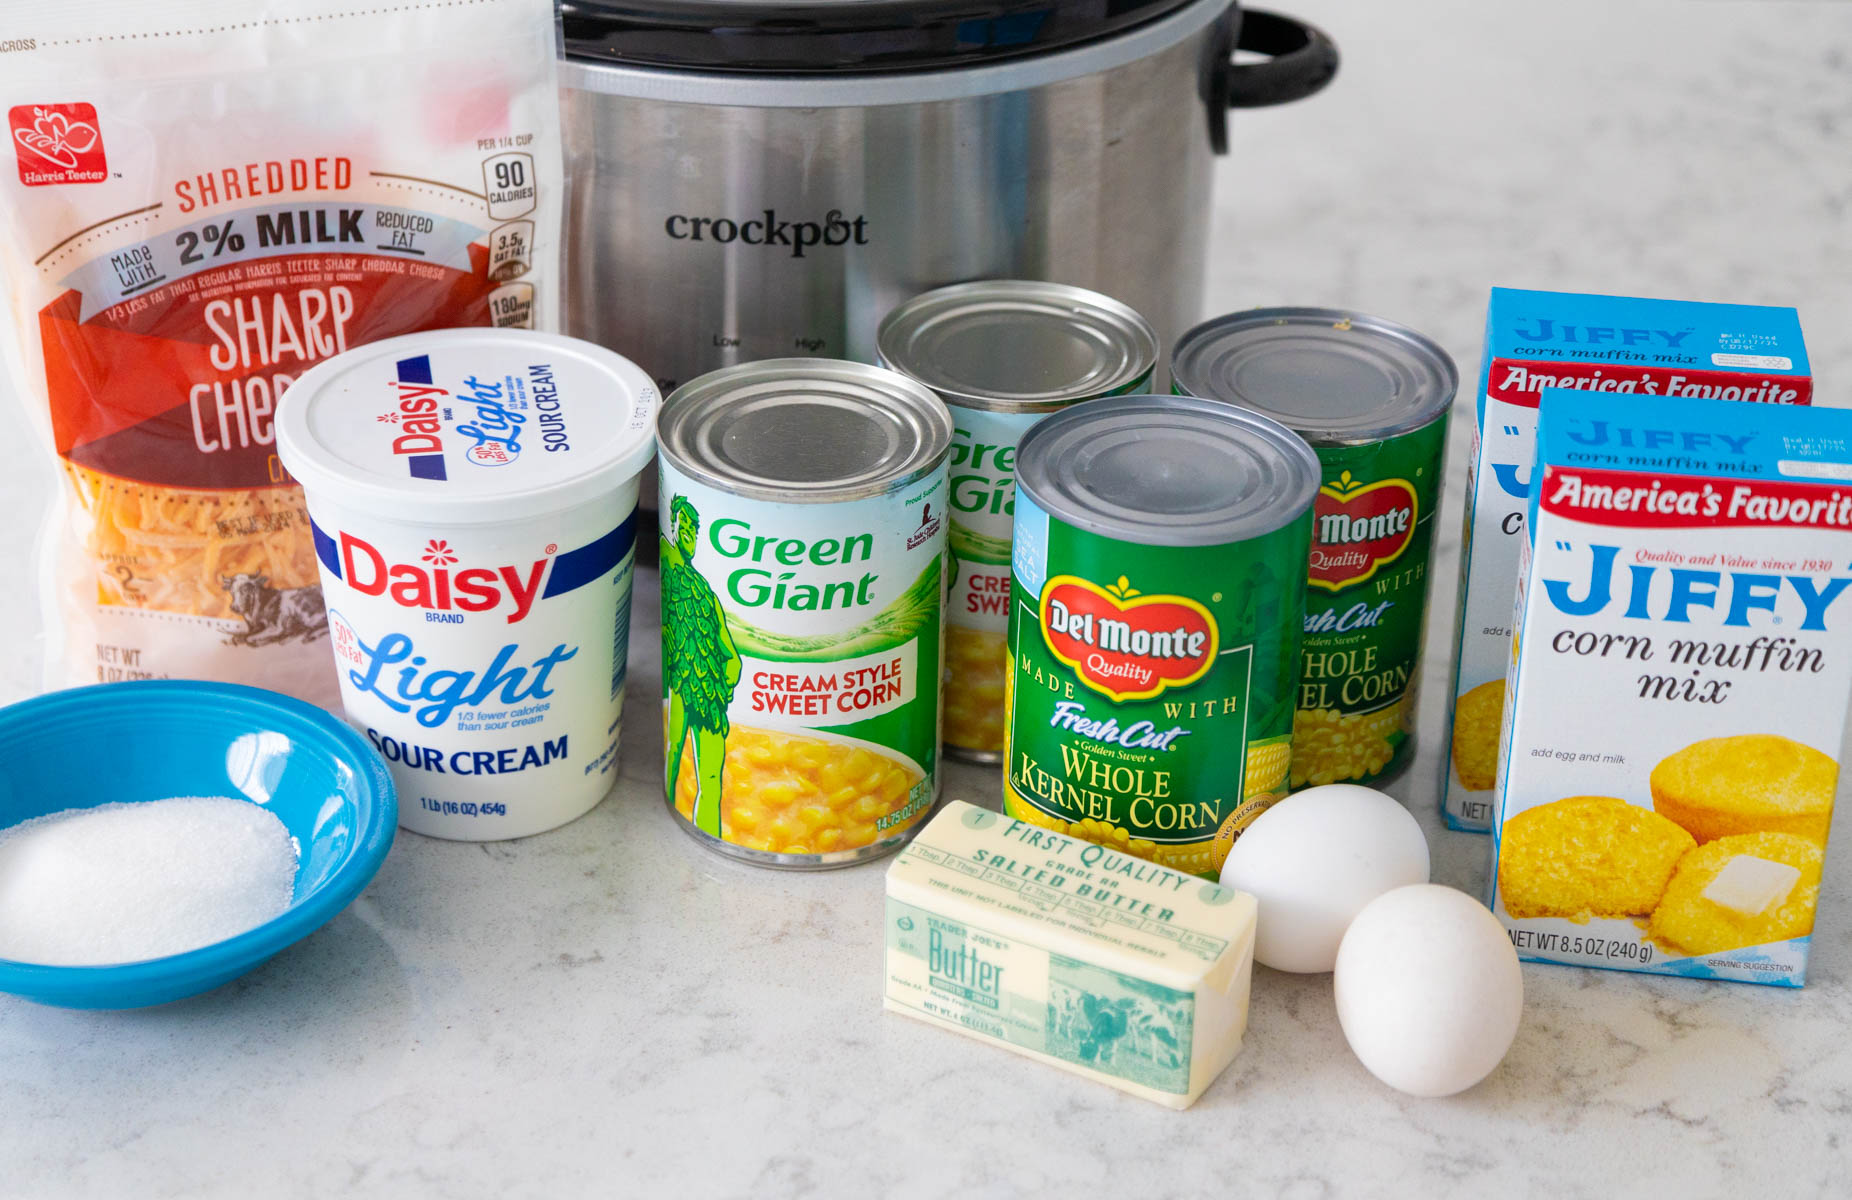 The ingredients to make Jiffy cornbread casserole are lined up on the counter next to the Crock Pot.